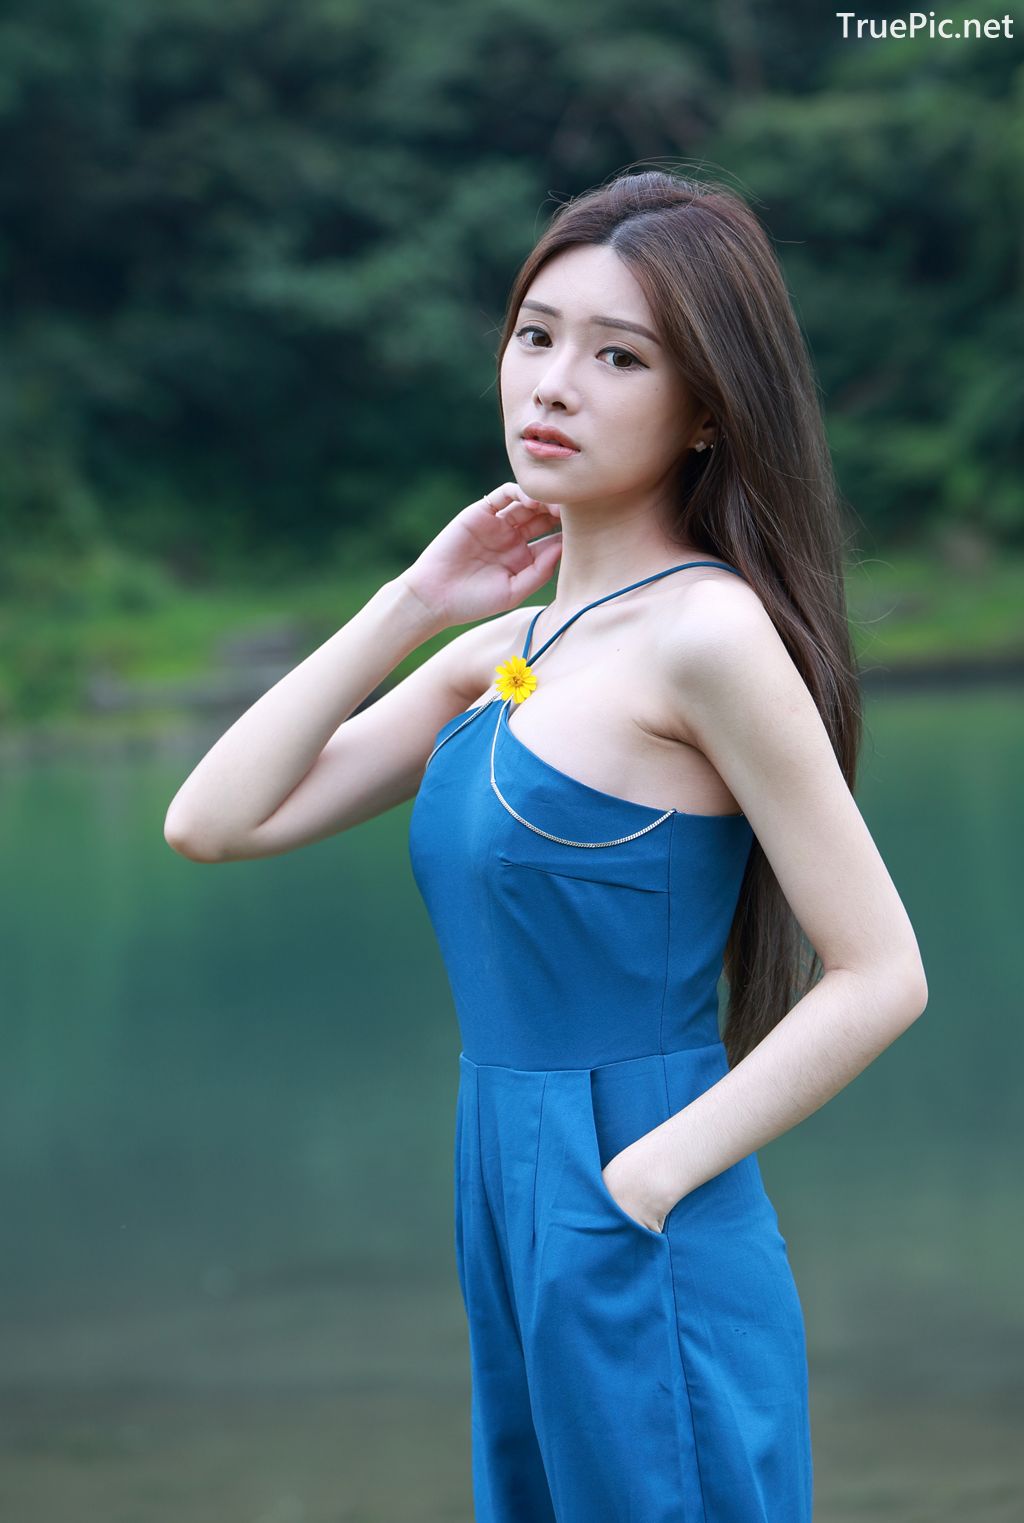 Image-Taiwanese-Pure-Girl-承容-Young-Beautiful-And-Lovely-TruePic.net- Picture-57